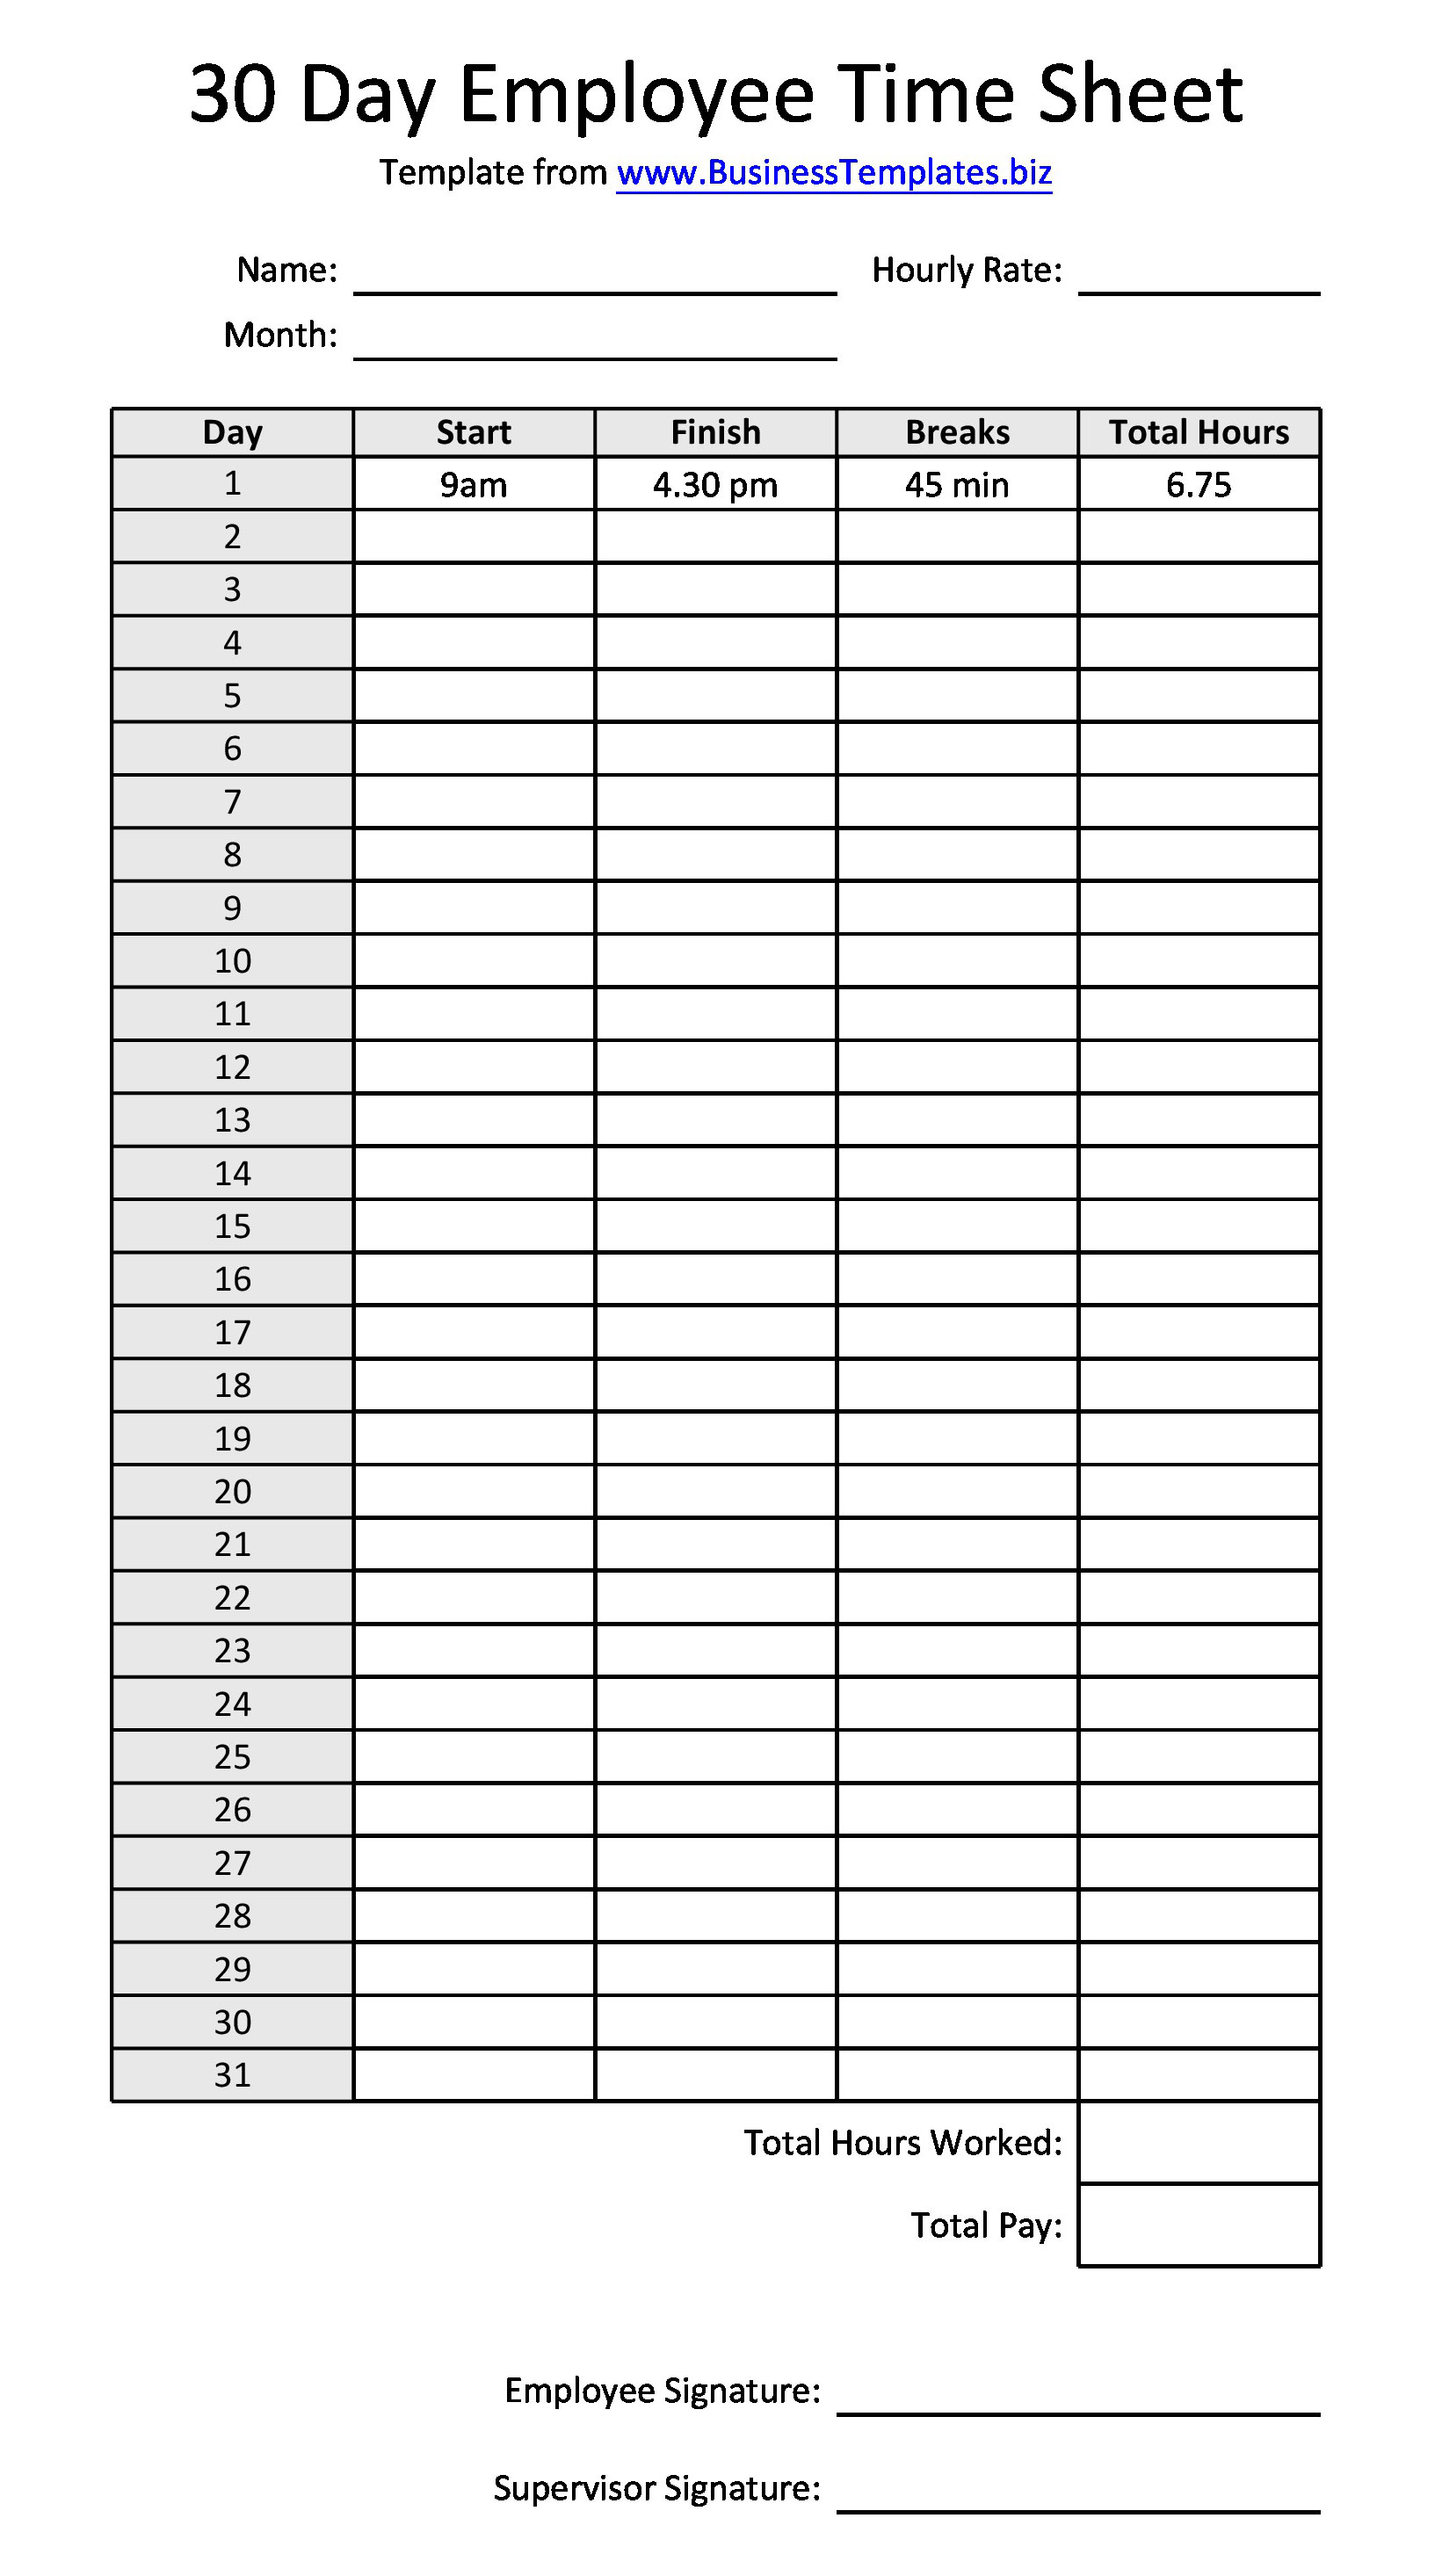 Free Templates For Employee Time Sheets